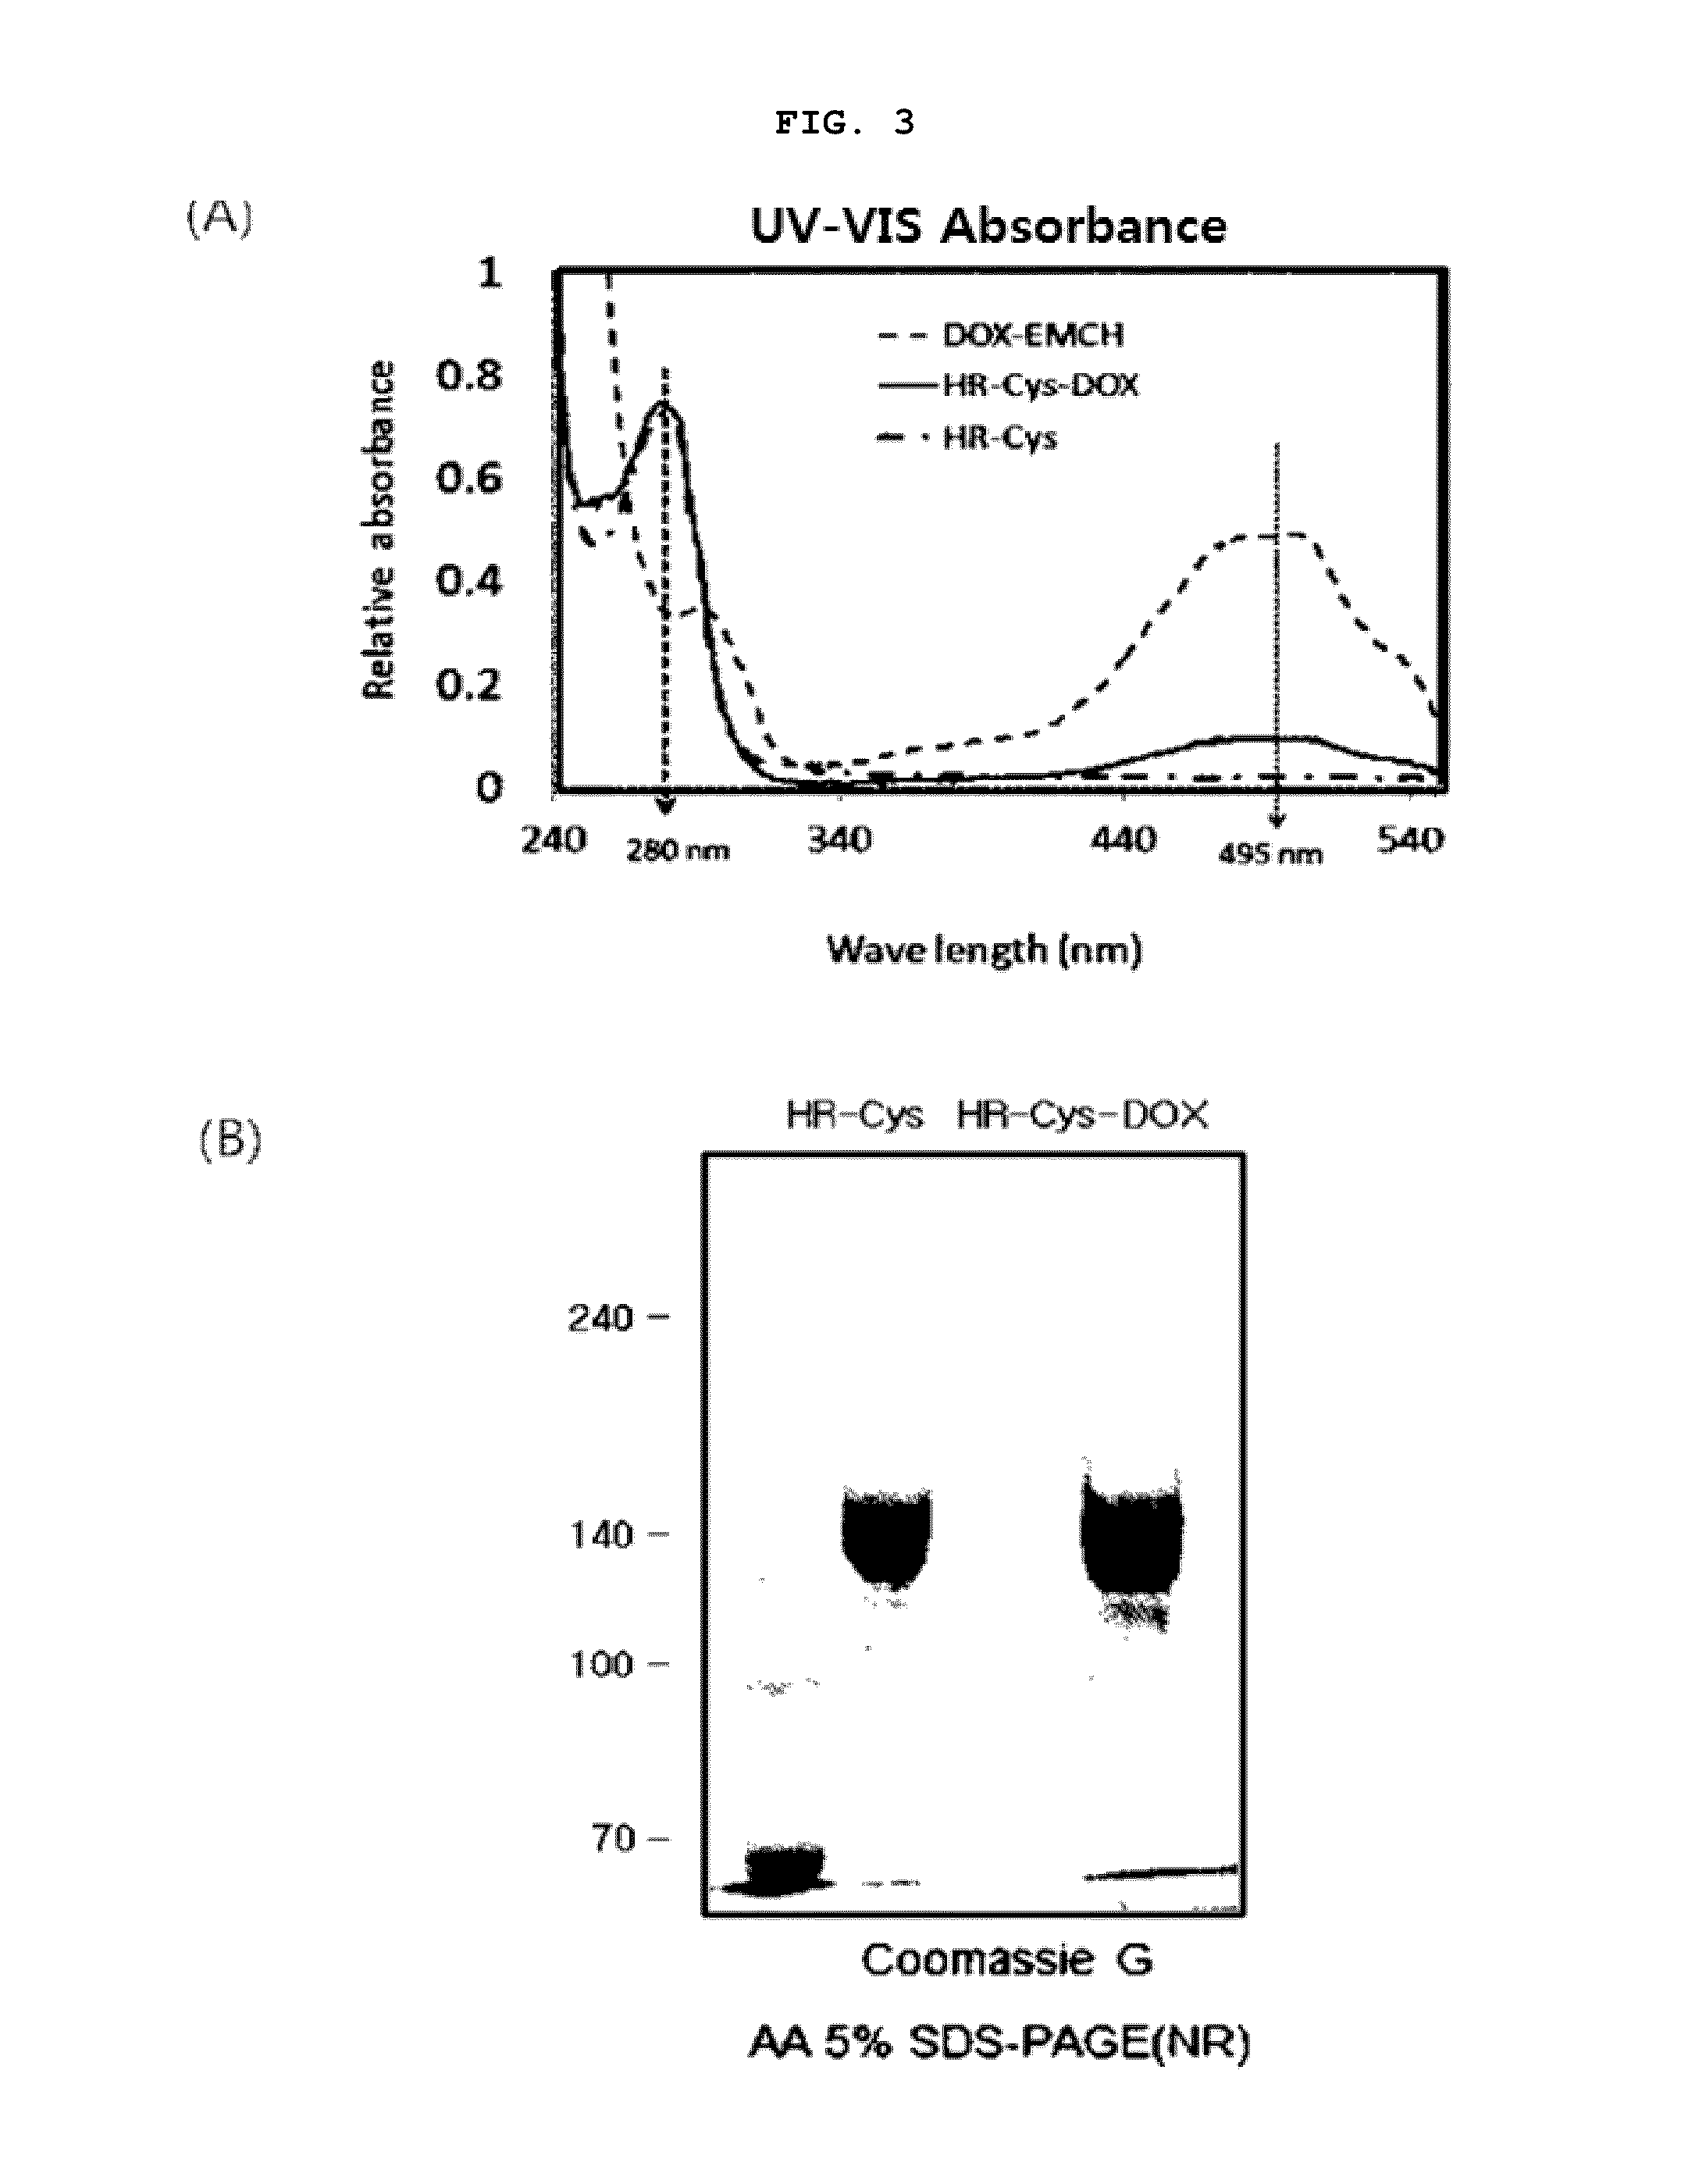 Modified antibody in which motif comprising cysteine residue is bound, modified antibody-drug conjugate comprising the modified antibody, and production method for same